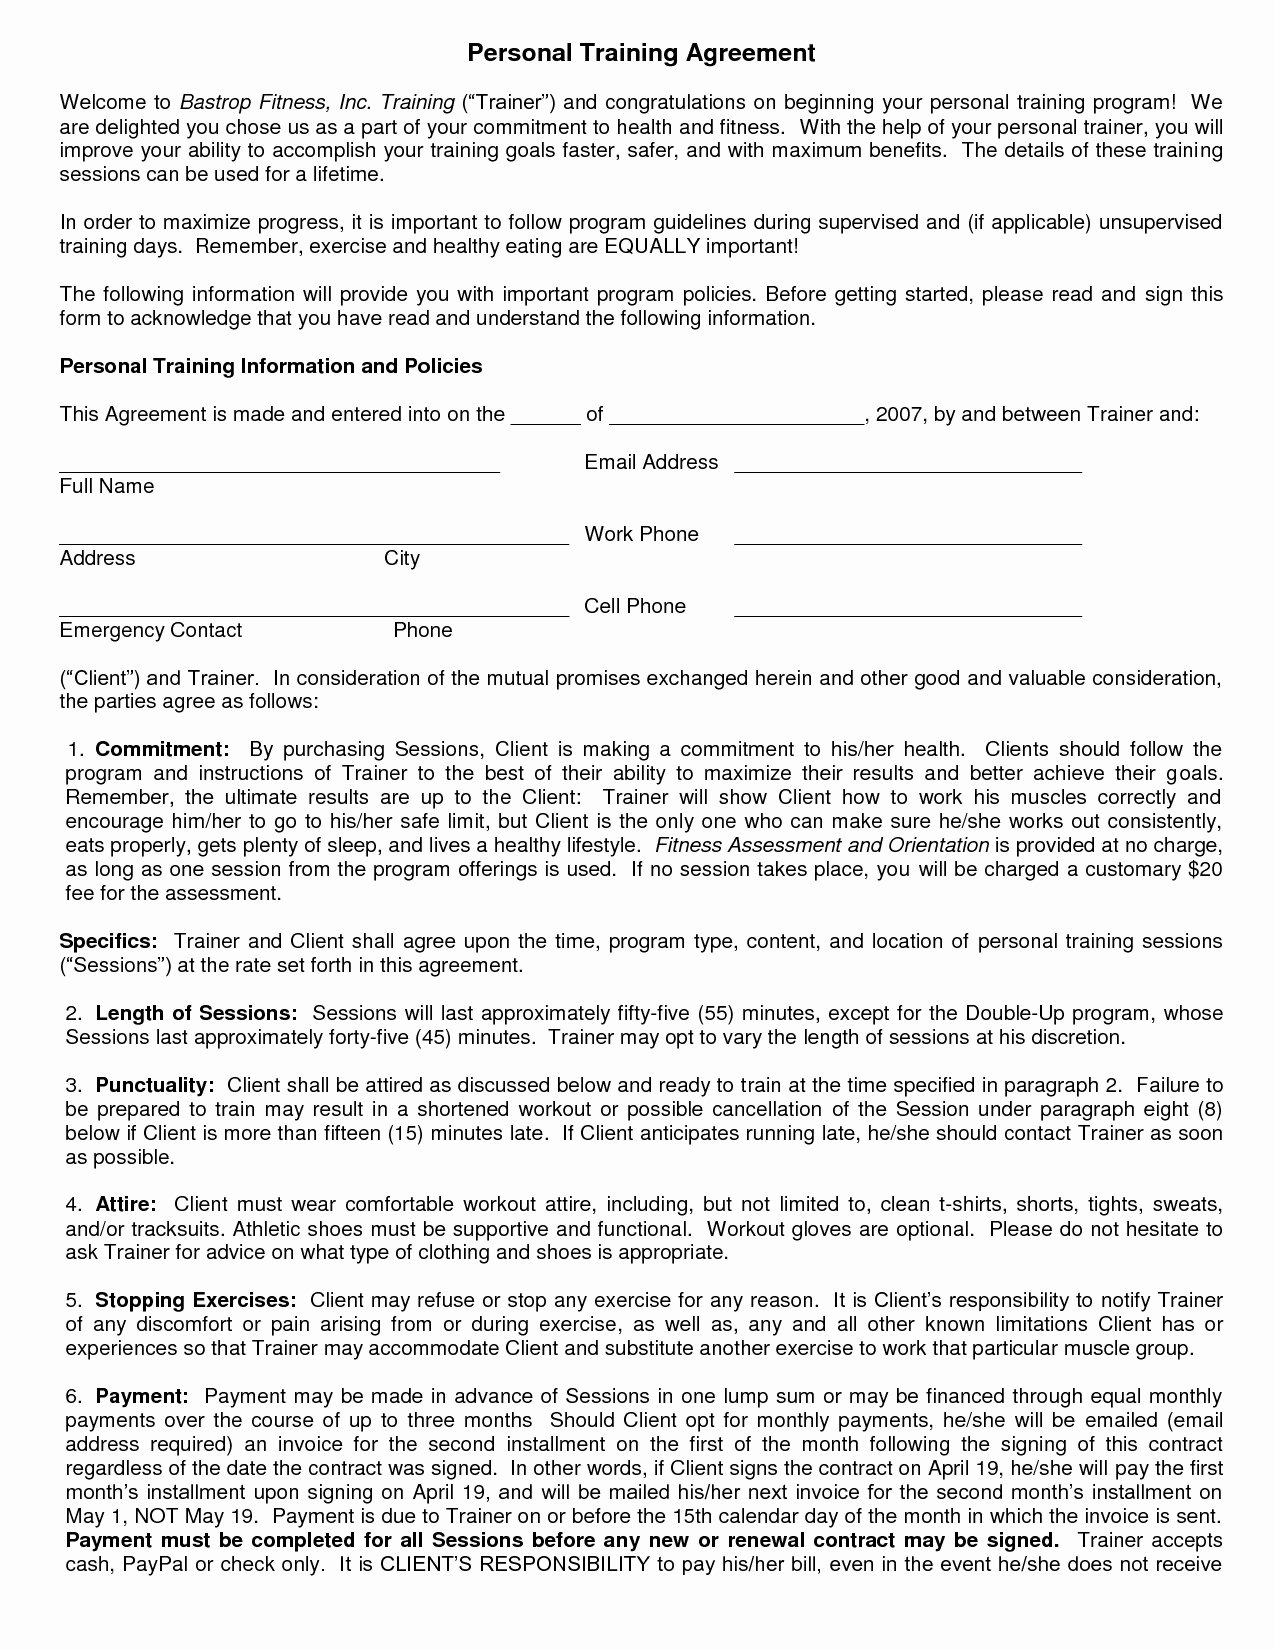 Personal Training Contract Template Best Of Personal Training Service Agreement Excellent 27